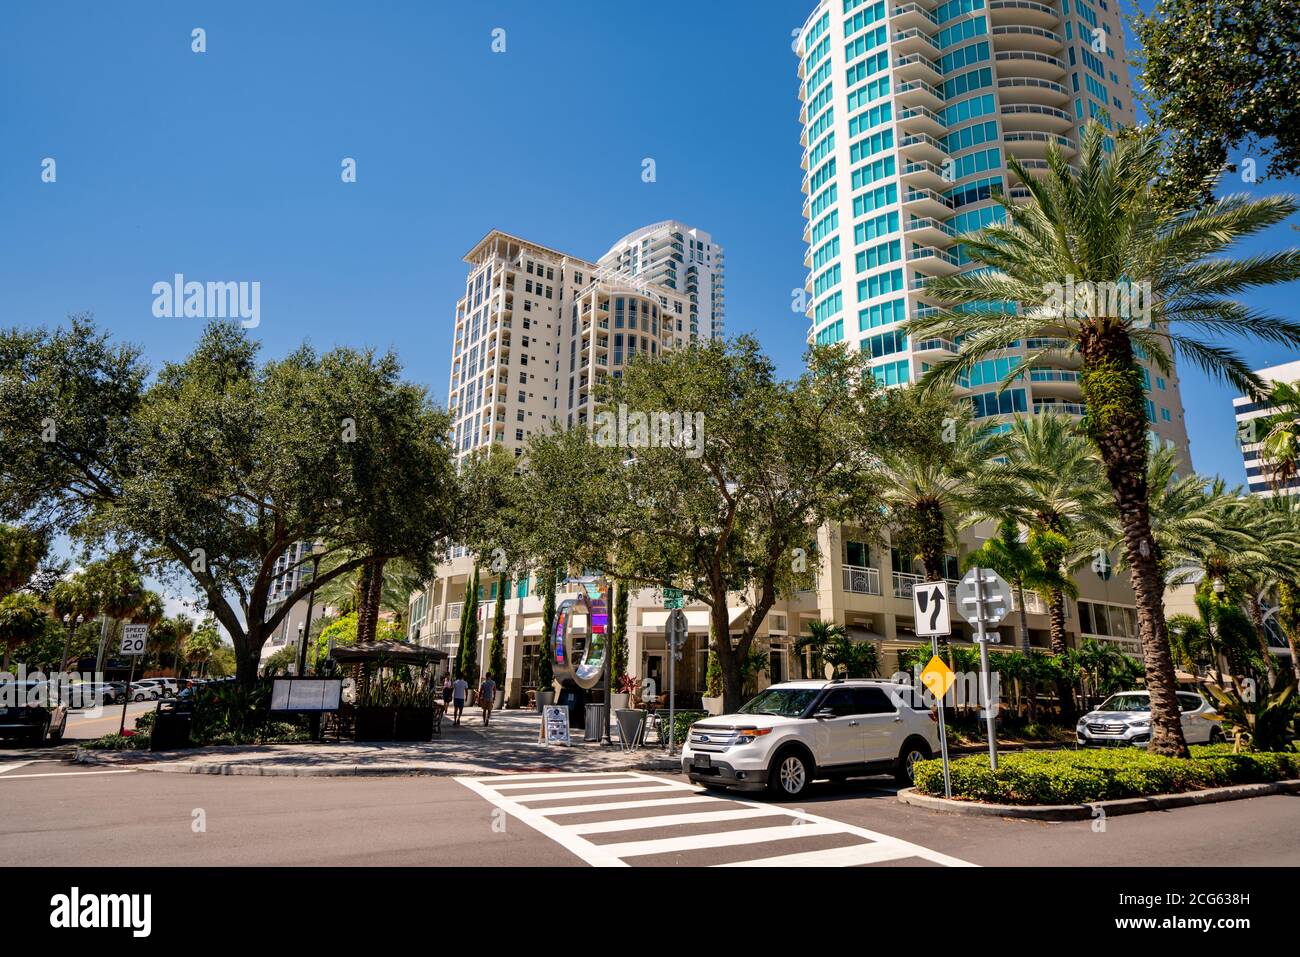 Photo of scene at Beach Drive St Petersburg FL USA on a nice colorful day Stock Photo